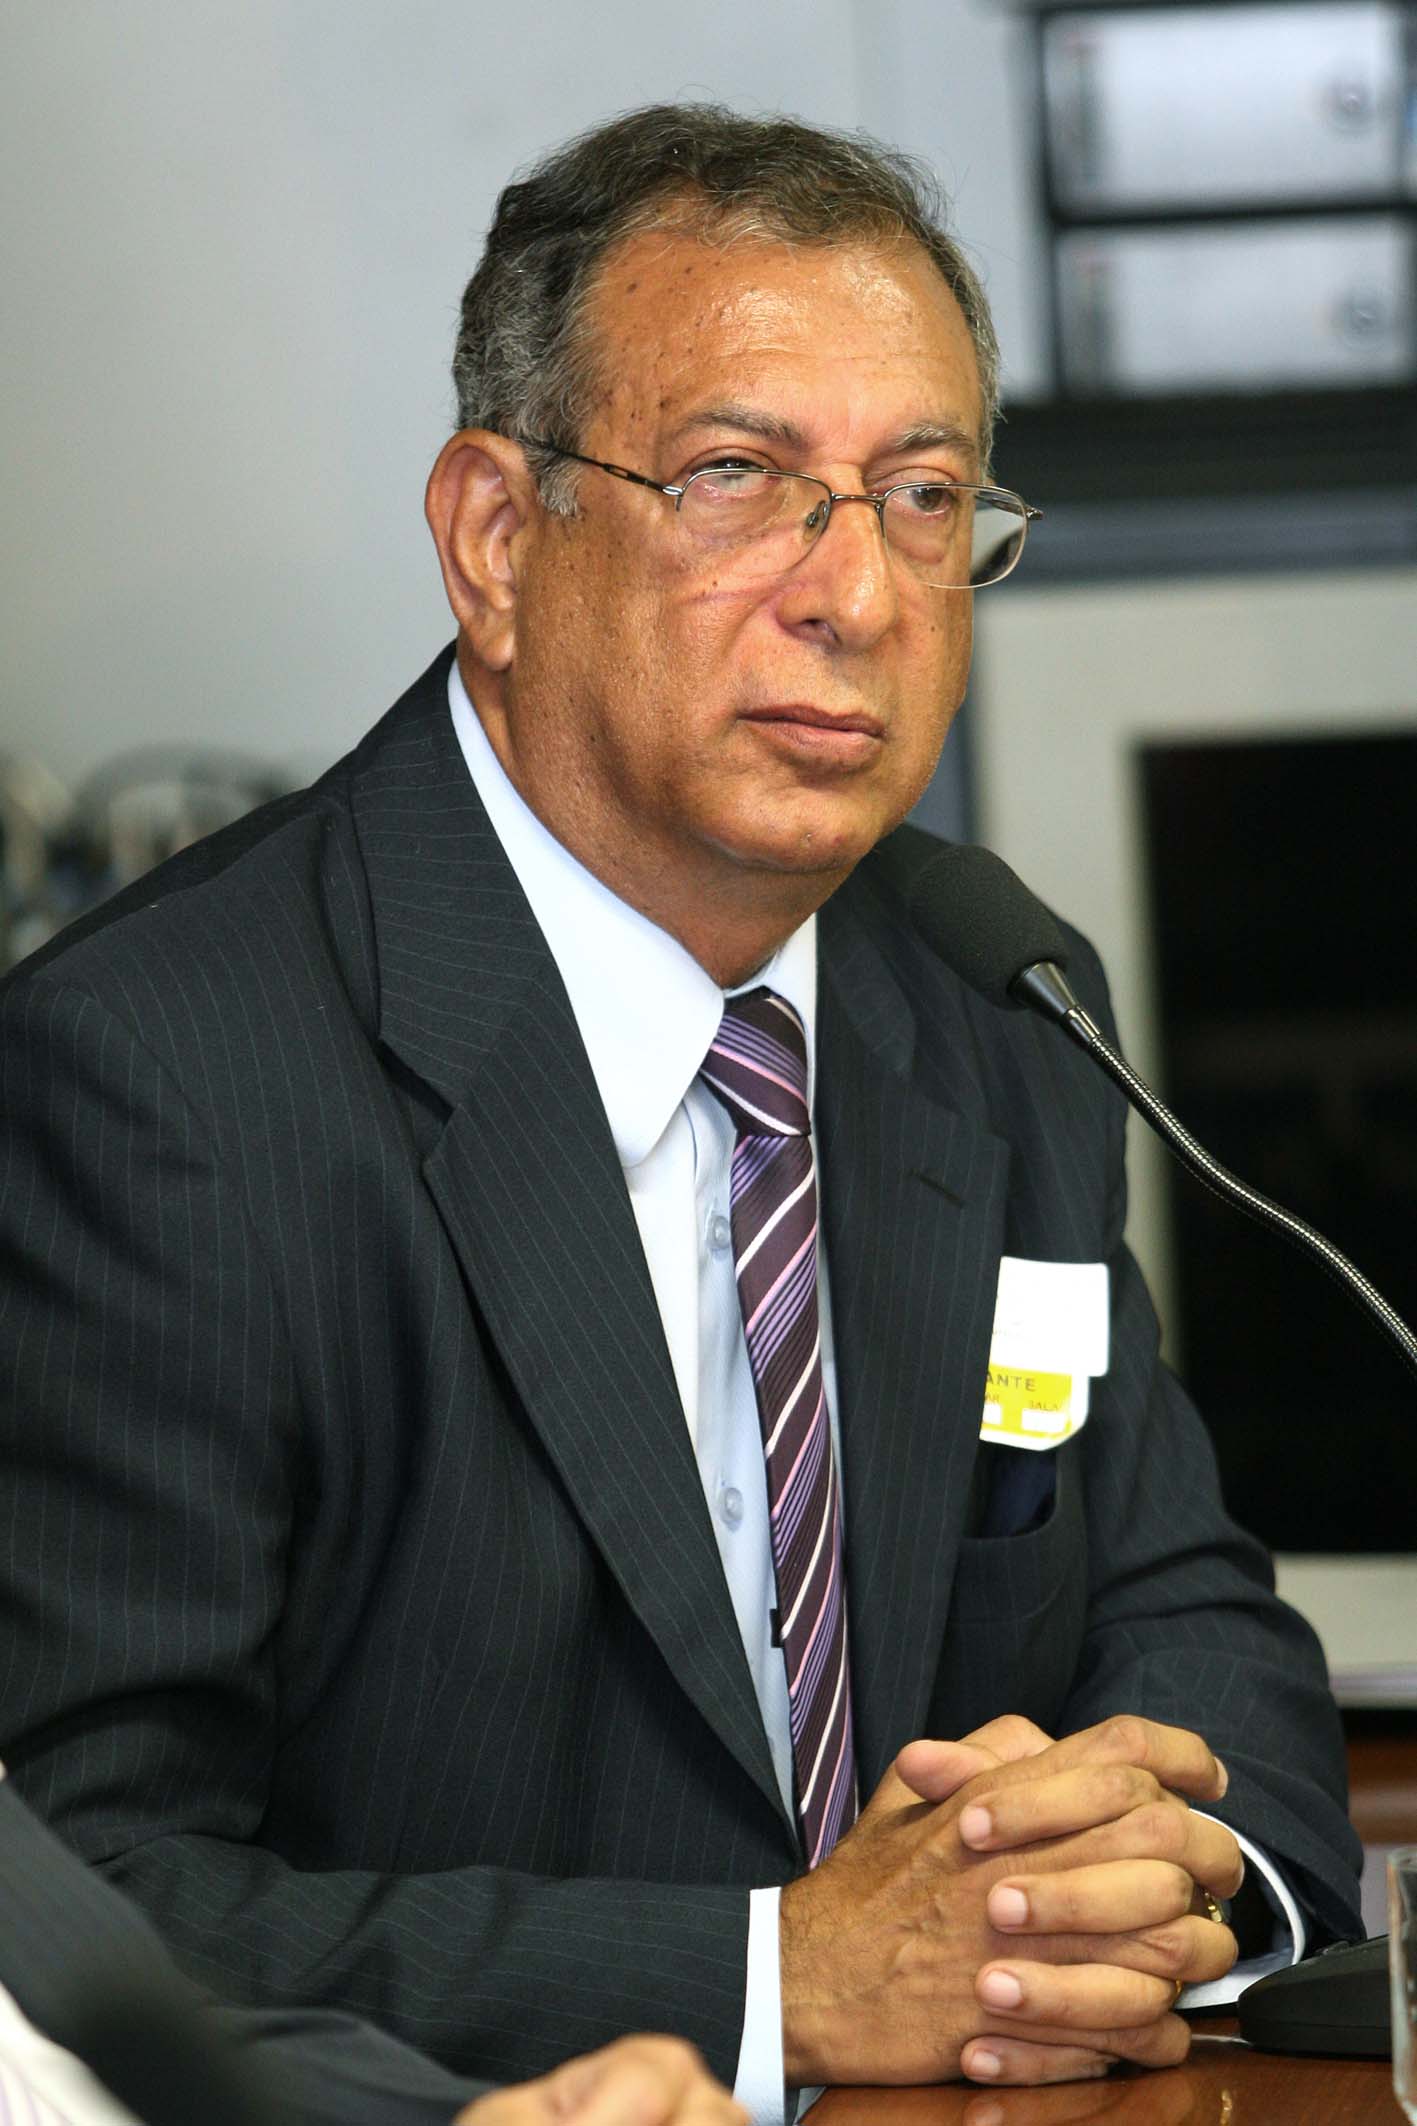 a man with glasses wearing a suit and tie